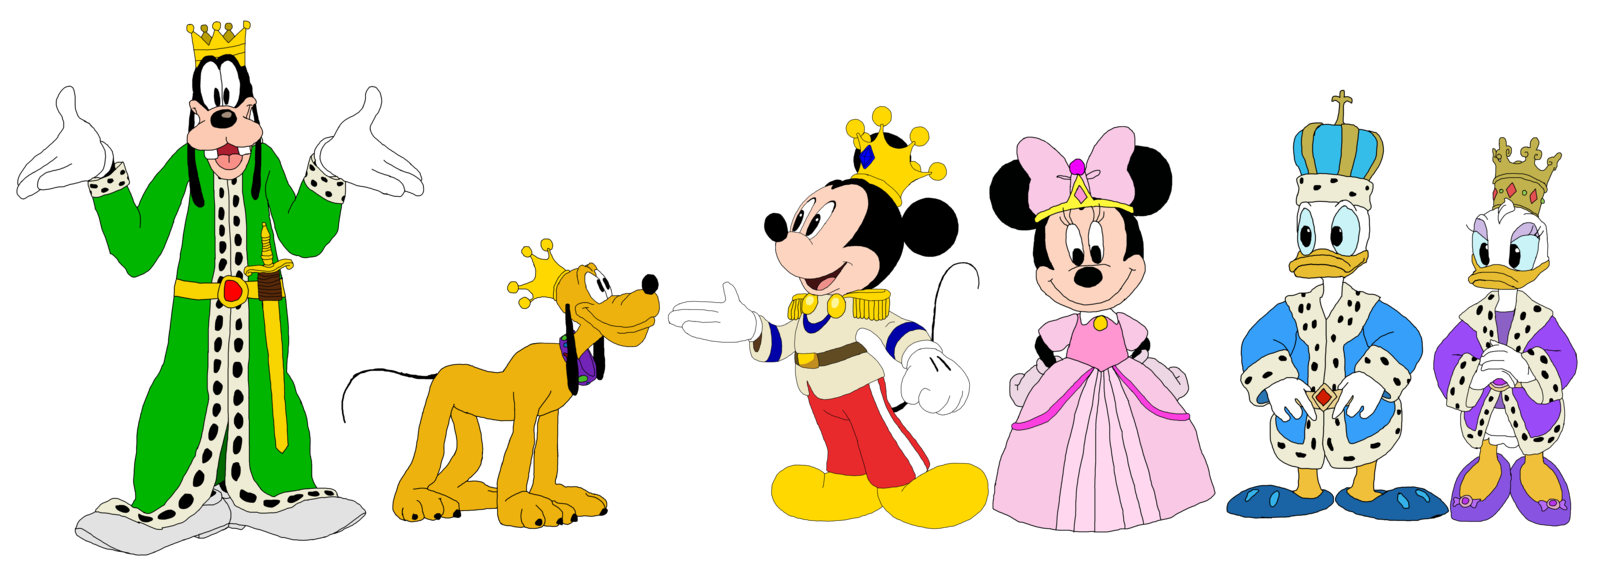 friends clipart mickey mouse clubhouse